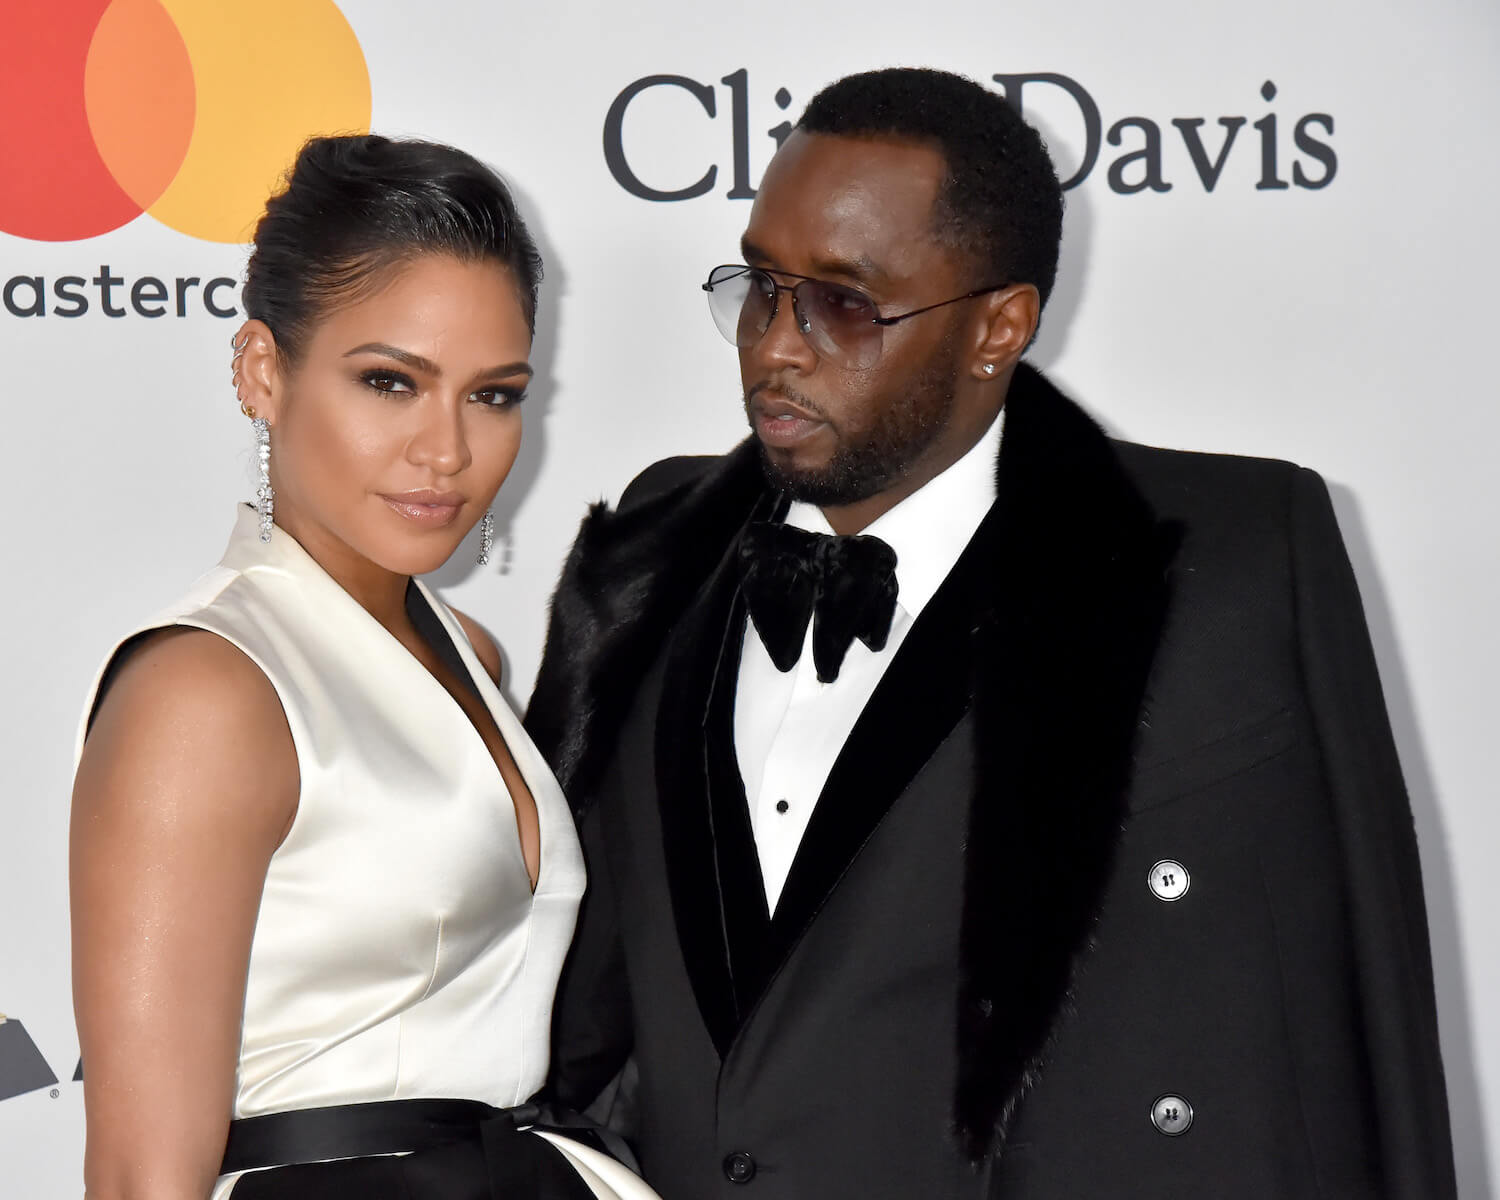 Casandra 'Cassie' Ventura and Sean 'P. Diddy' Combs in formal attire at an event